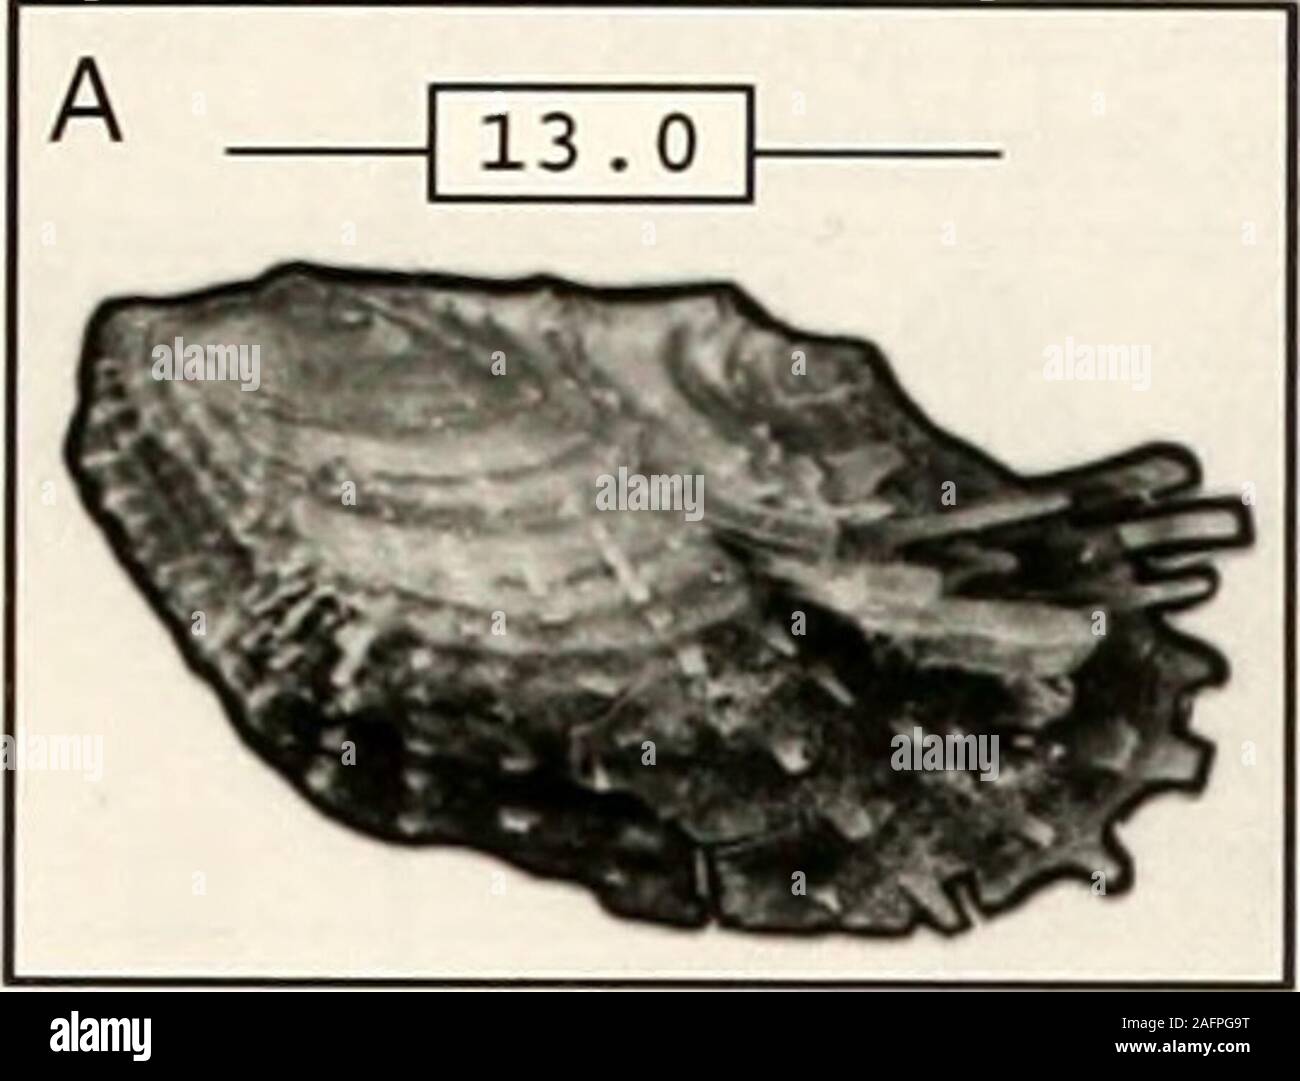 . Bulletins of American paleontology. l teeth in each valve; the anterior becoming elongatein large shells. The shell is basically ornamented withfine concentric lines over the entire surface, with ad-ditional fine radial ribs on both anterior and posteriorends. Large, worn shells generally have the ornamen-tation smoothed off (Text-fig. 65A. B), so the mix ofornament types is best seen on smaller shells (Text-fig. 65C). The posterior margin is slighdy truncate. Comparison.—The two-part ornamentation and thelarge size of the adult shells is distinctive. Name.—Mercenaria mercenaria (Linnaeus, 1 Stock Photo